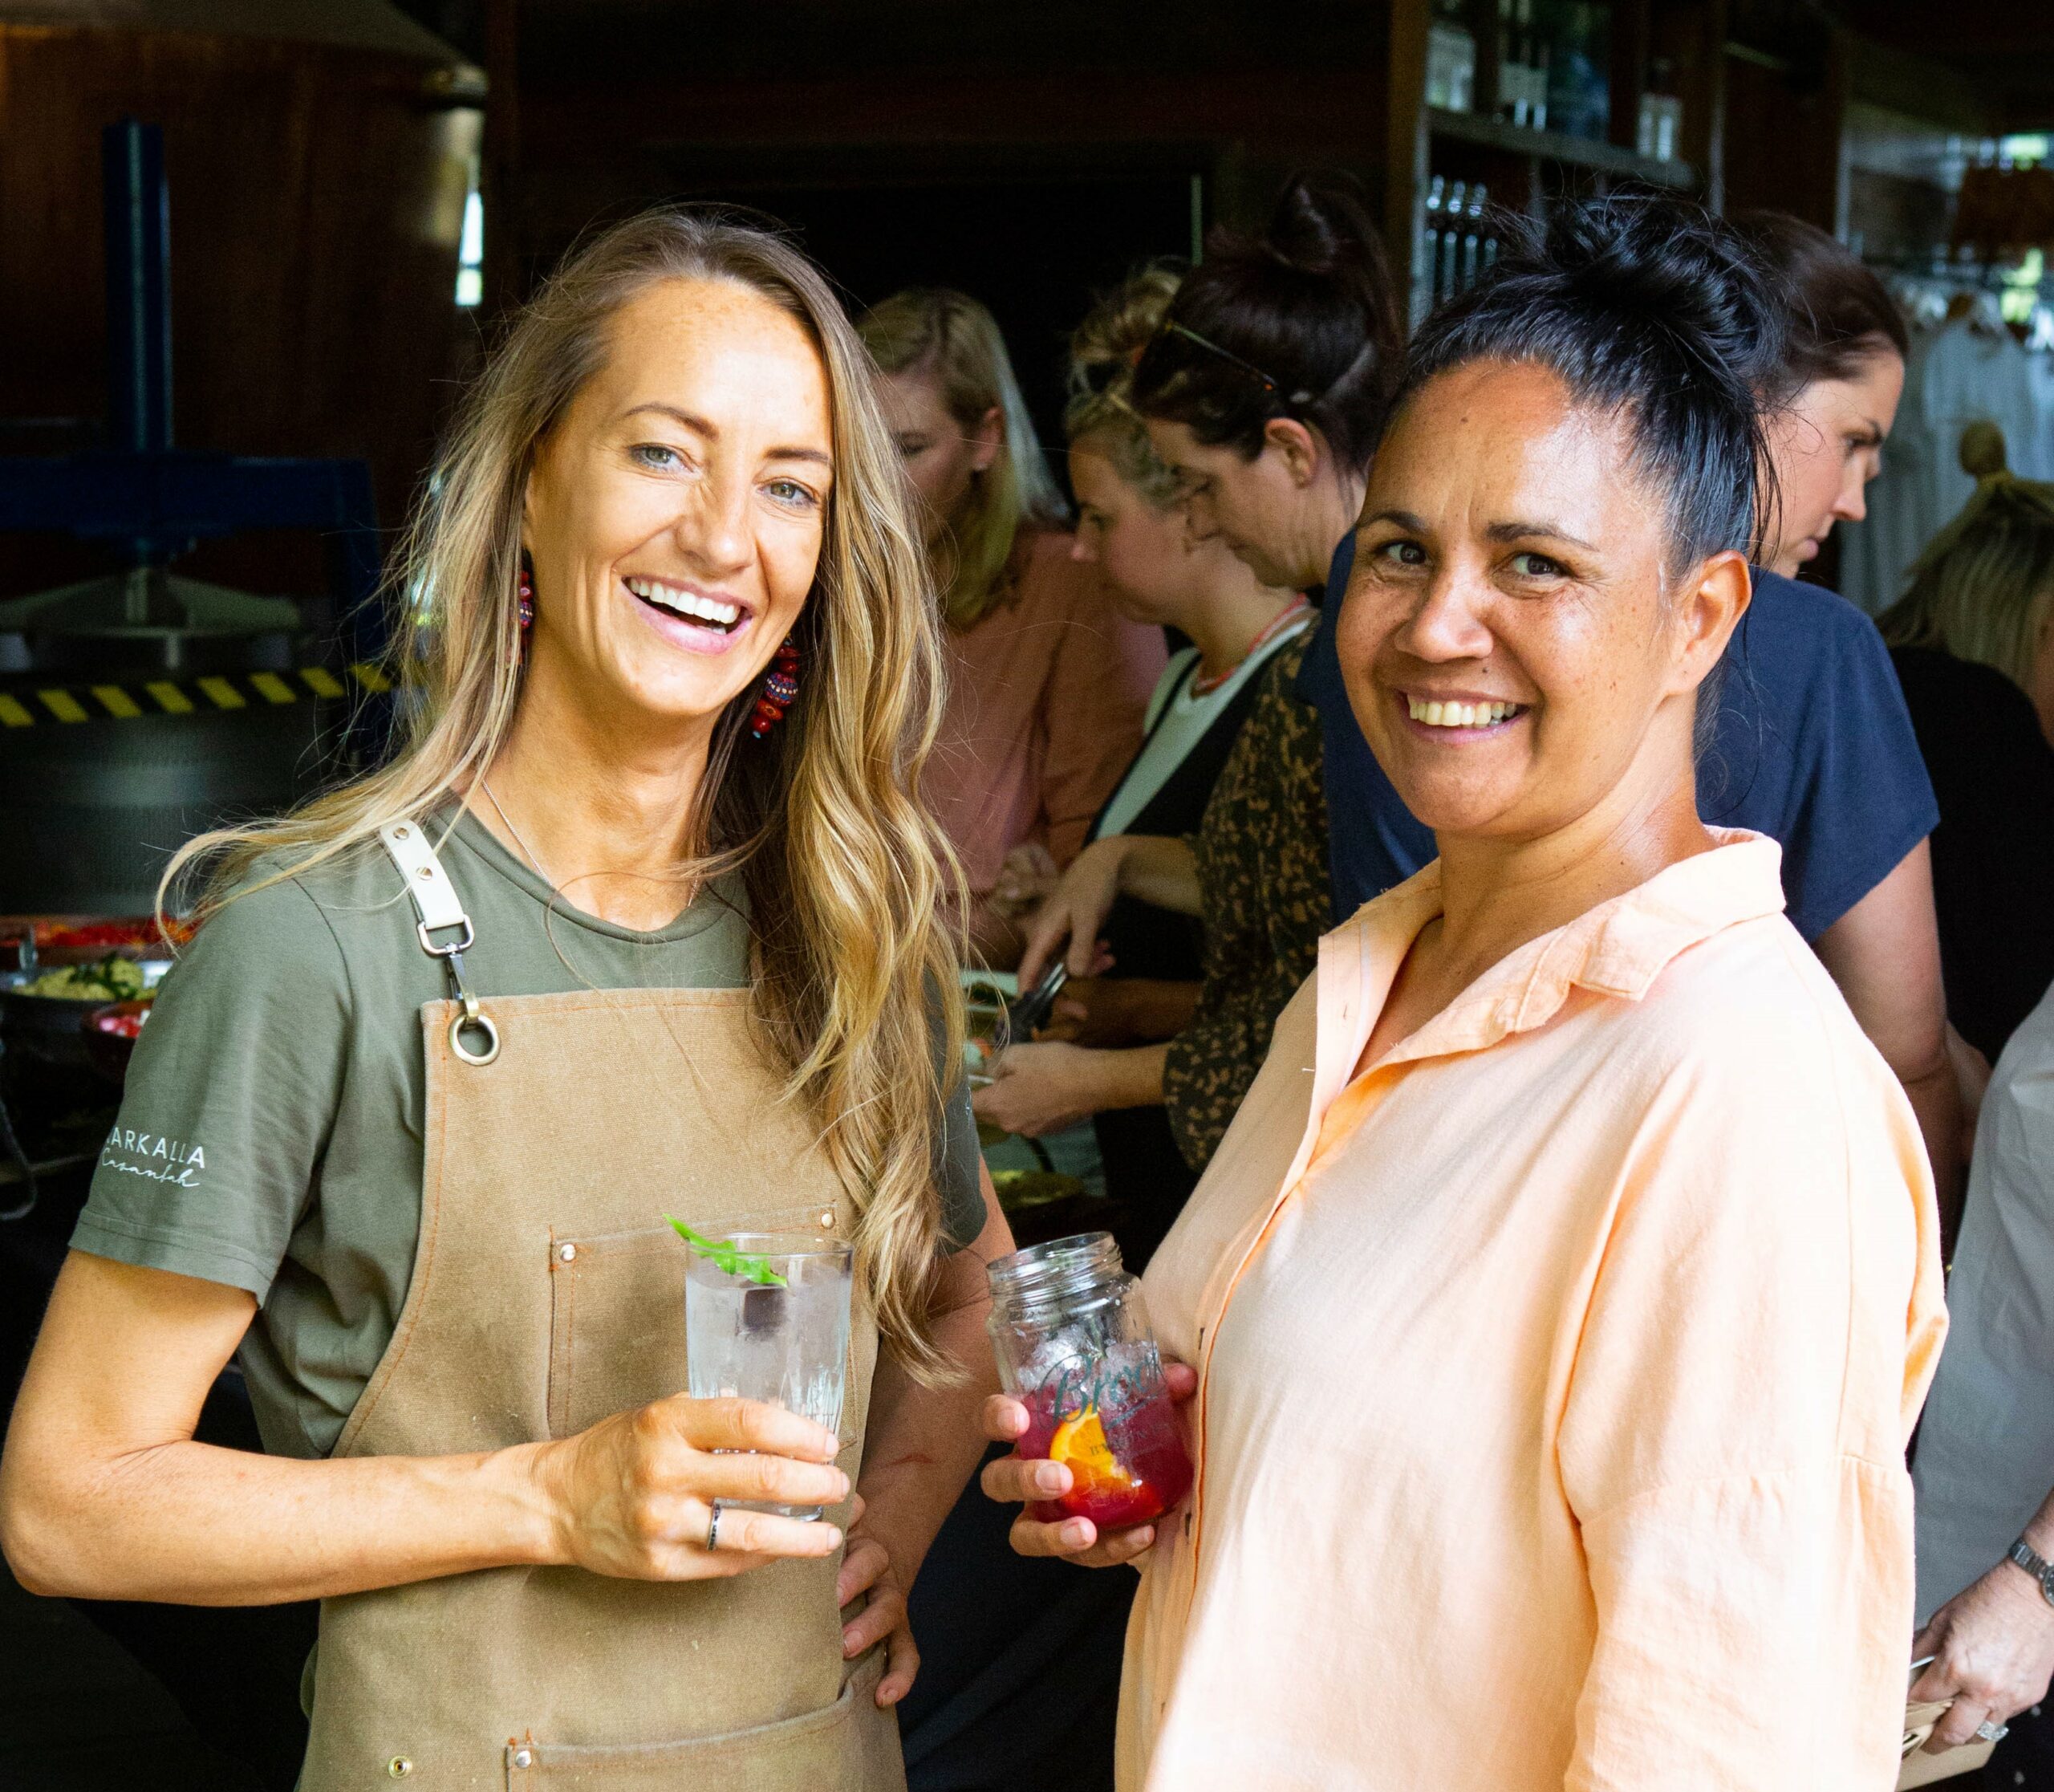 Bundjalung Culture & Dining Experience at Cape Byron Distillery